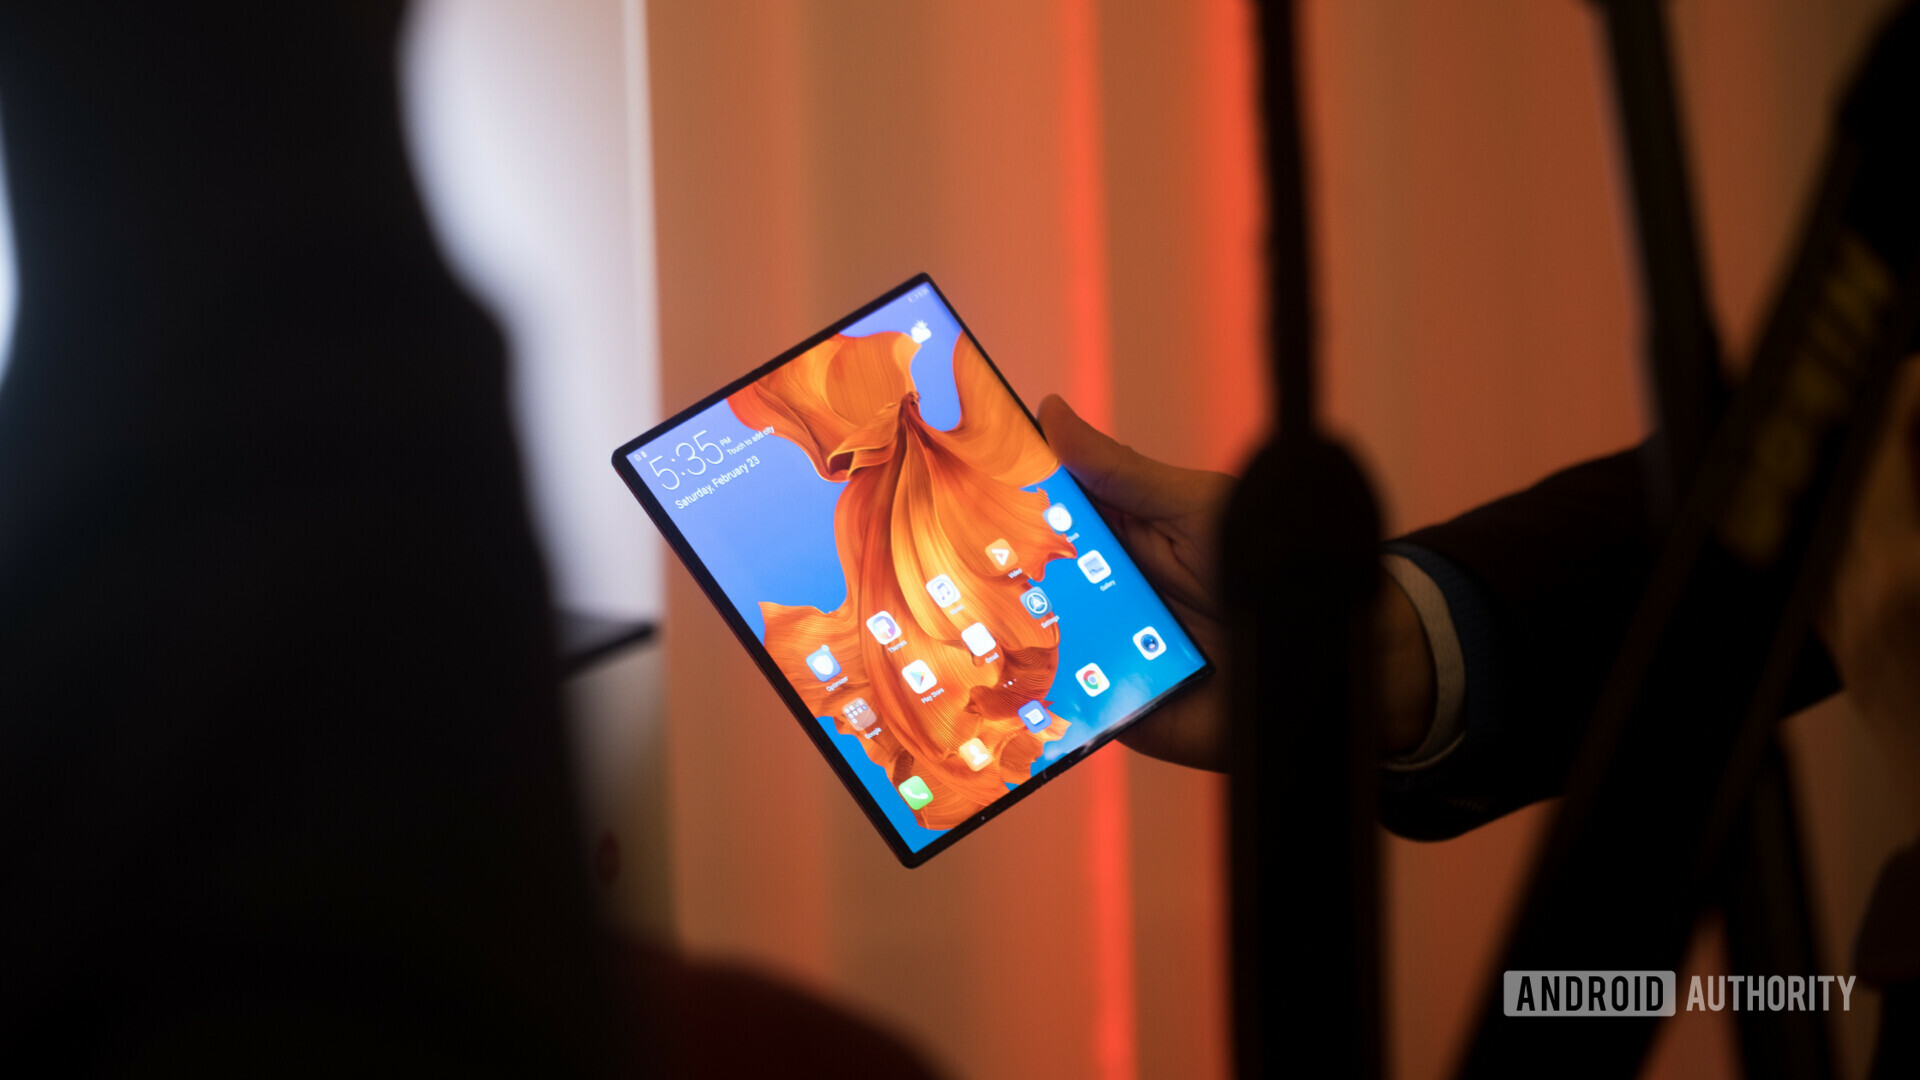 The new foldable phone Huawei Mate X used in tablet mode at a presentation at MWC 2019.